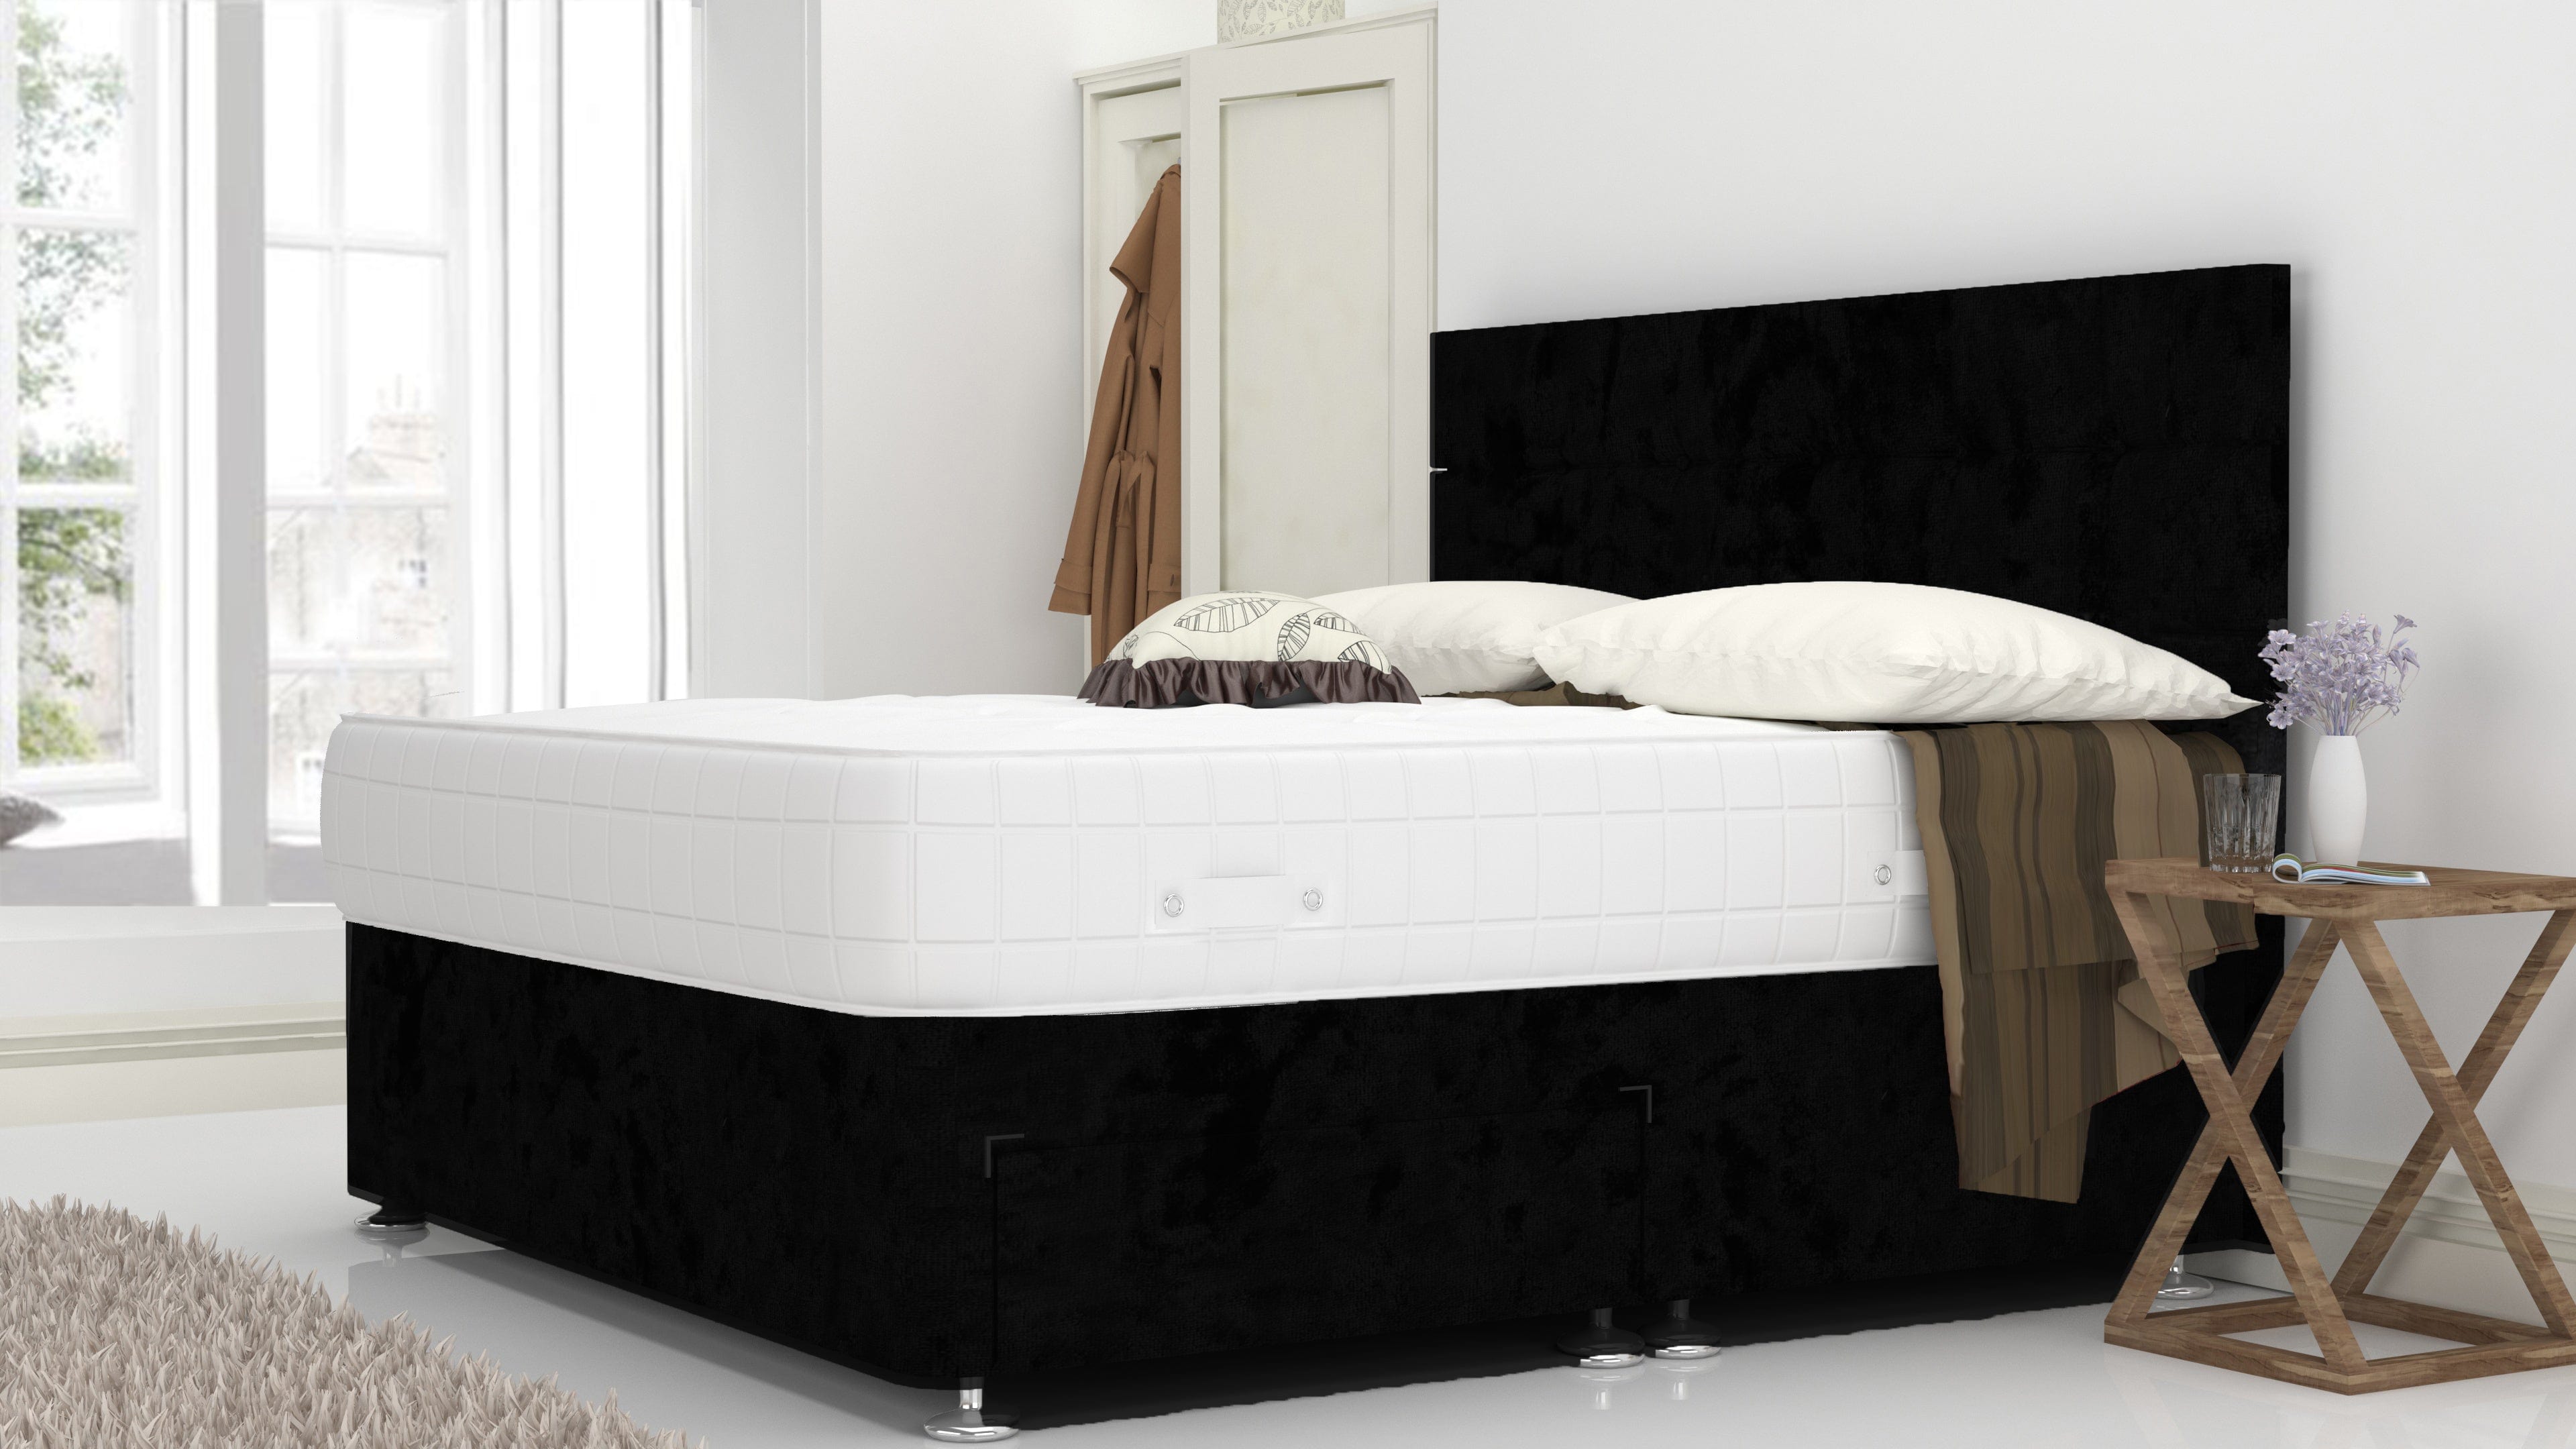 Black Crushed 3 Feet Divan Bed Set With Cube Headboard (Included Feet) And Free Orthopedic Mattress